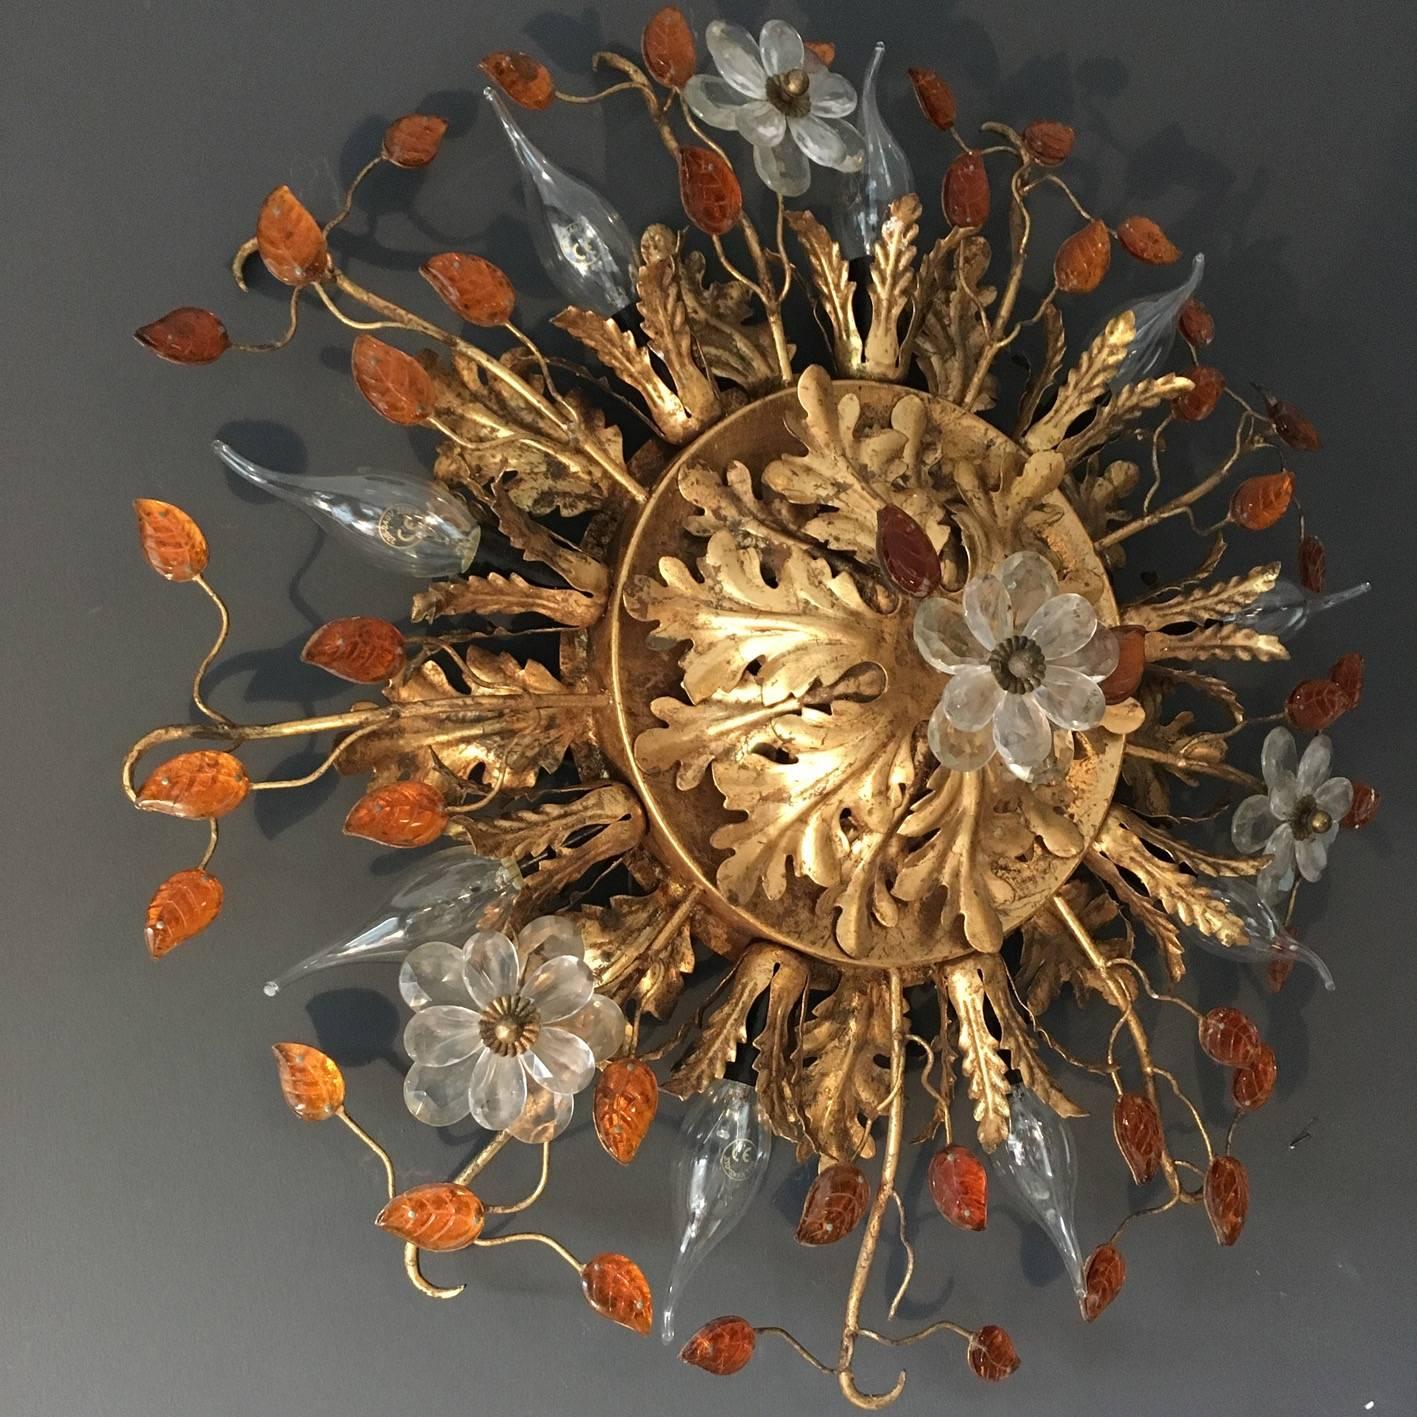 Italian Florentine flush mount ceiling light or wall light

Attributed to Banci Firenze, Italy, circa 1950s

Stunning gold tone acanthus leaf design with clear glass flowers and amber glass leaves on gilt metal stems, glass possible Murano